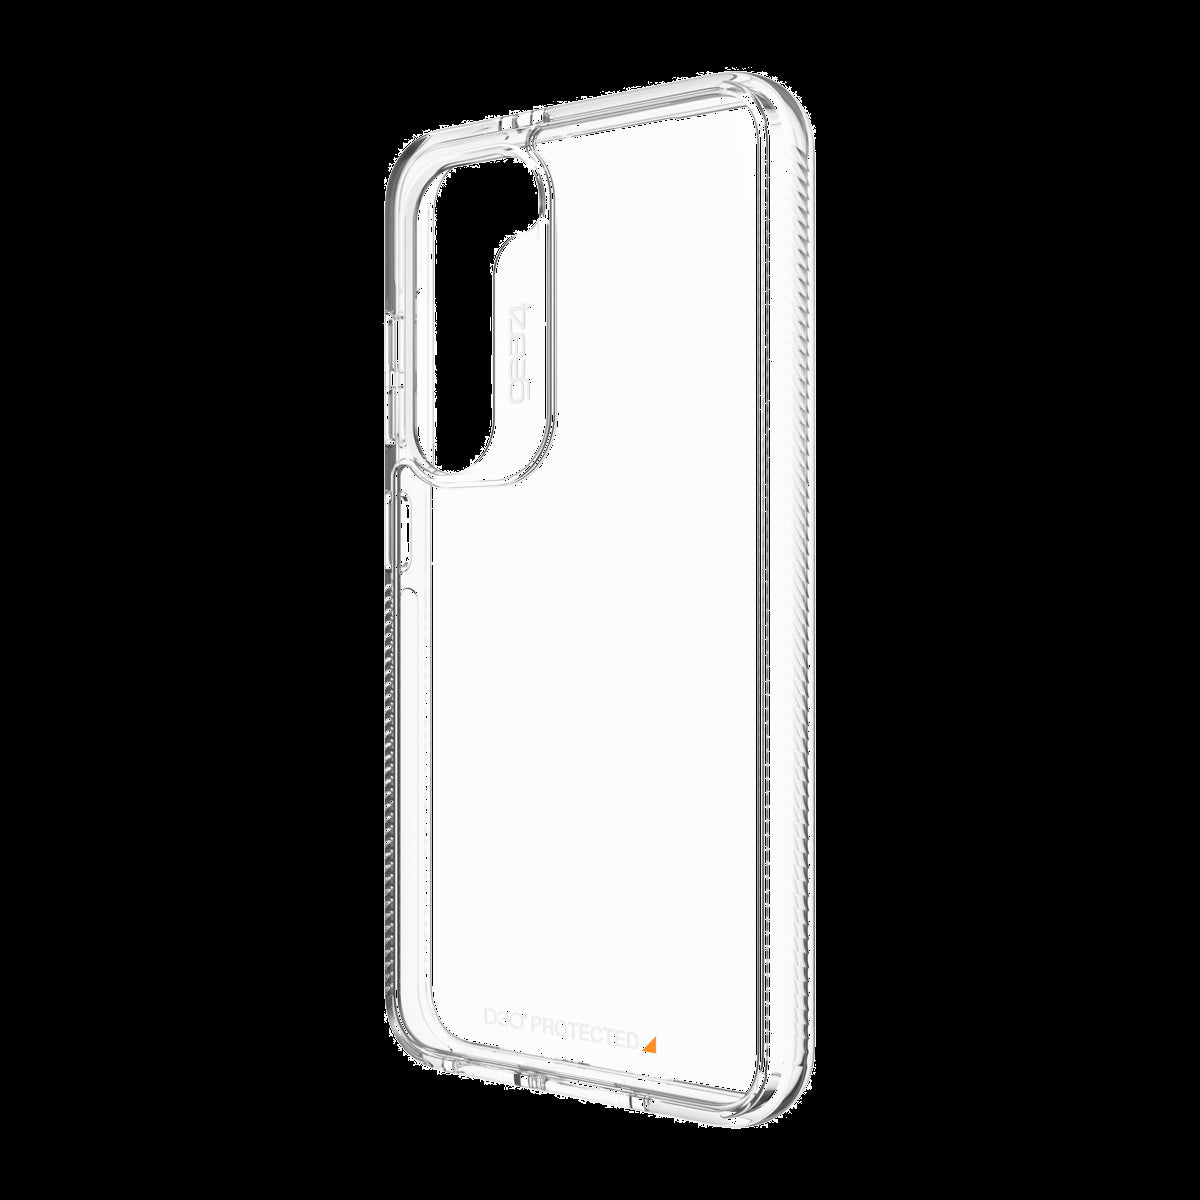 Designed to show off the original design of the device, the Gear4 Crystal Palace case features a sleek clear construction with D3O® Crystalex™ inside the case.